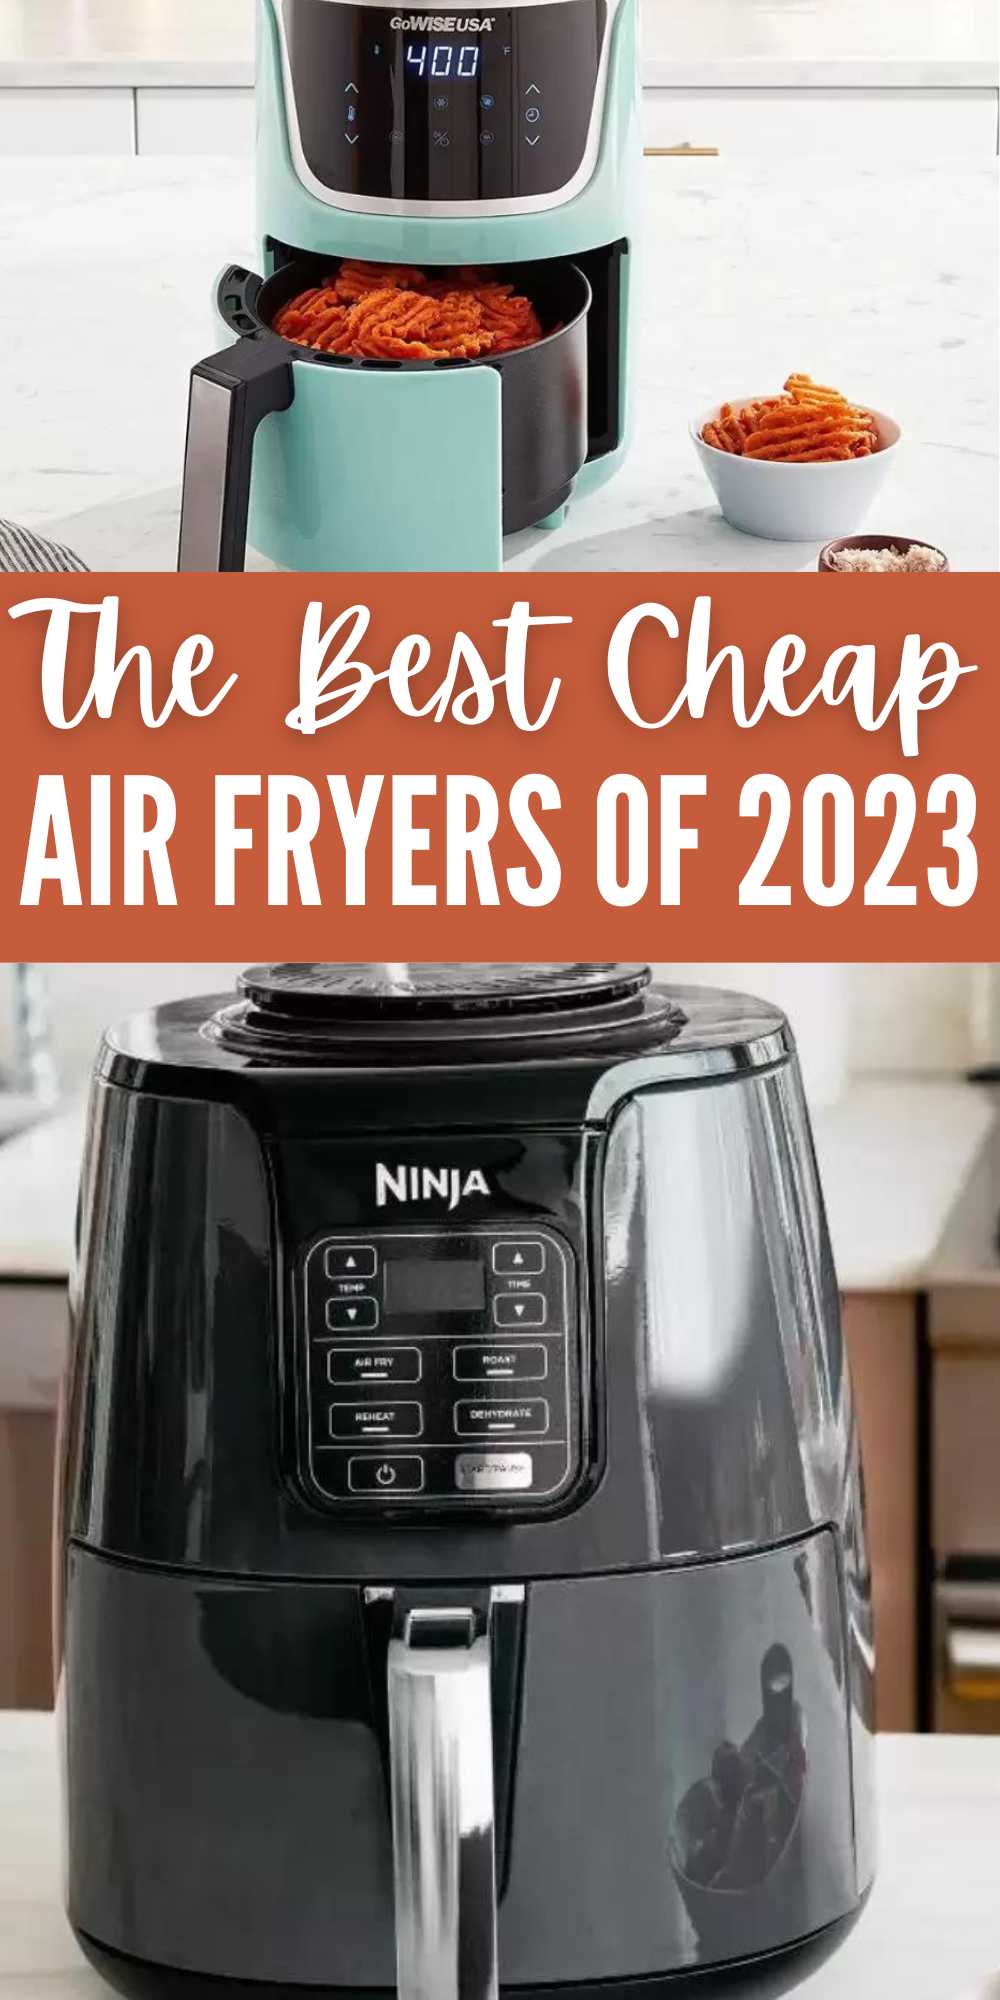 The 5 Best Cheap Air Fryers of 2023 - Eating on a Dime